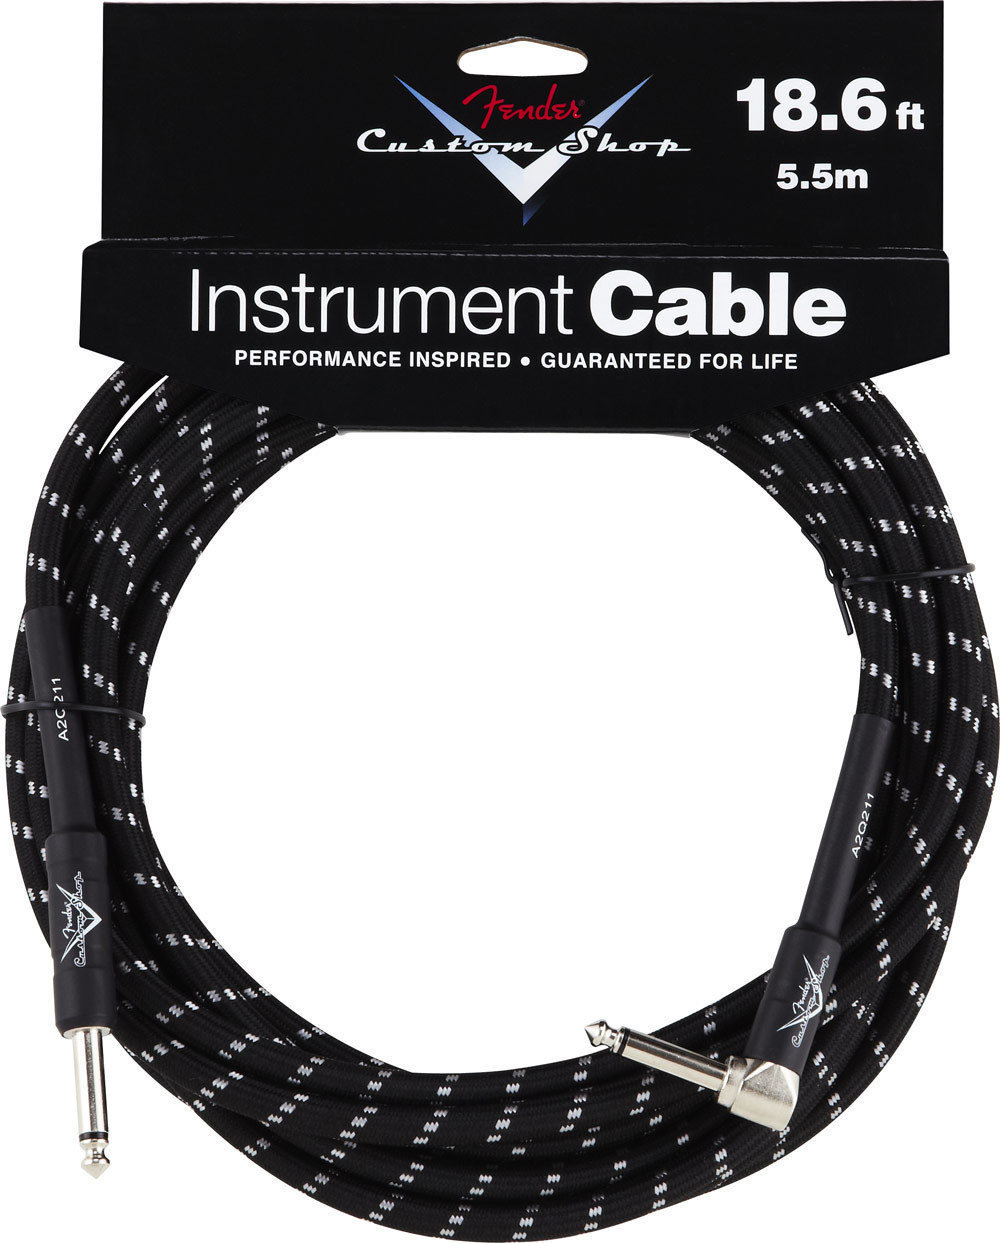 Câble pour instrument Fender Custom Shop Performance Series Cable 5.5m Black Tweed Angled